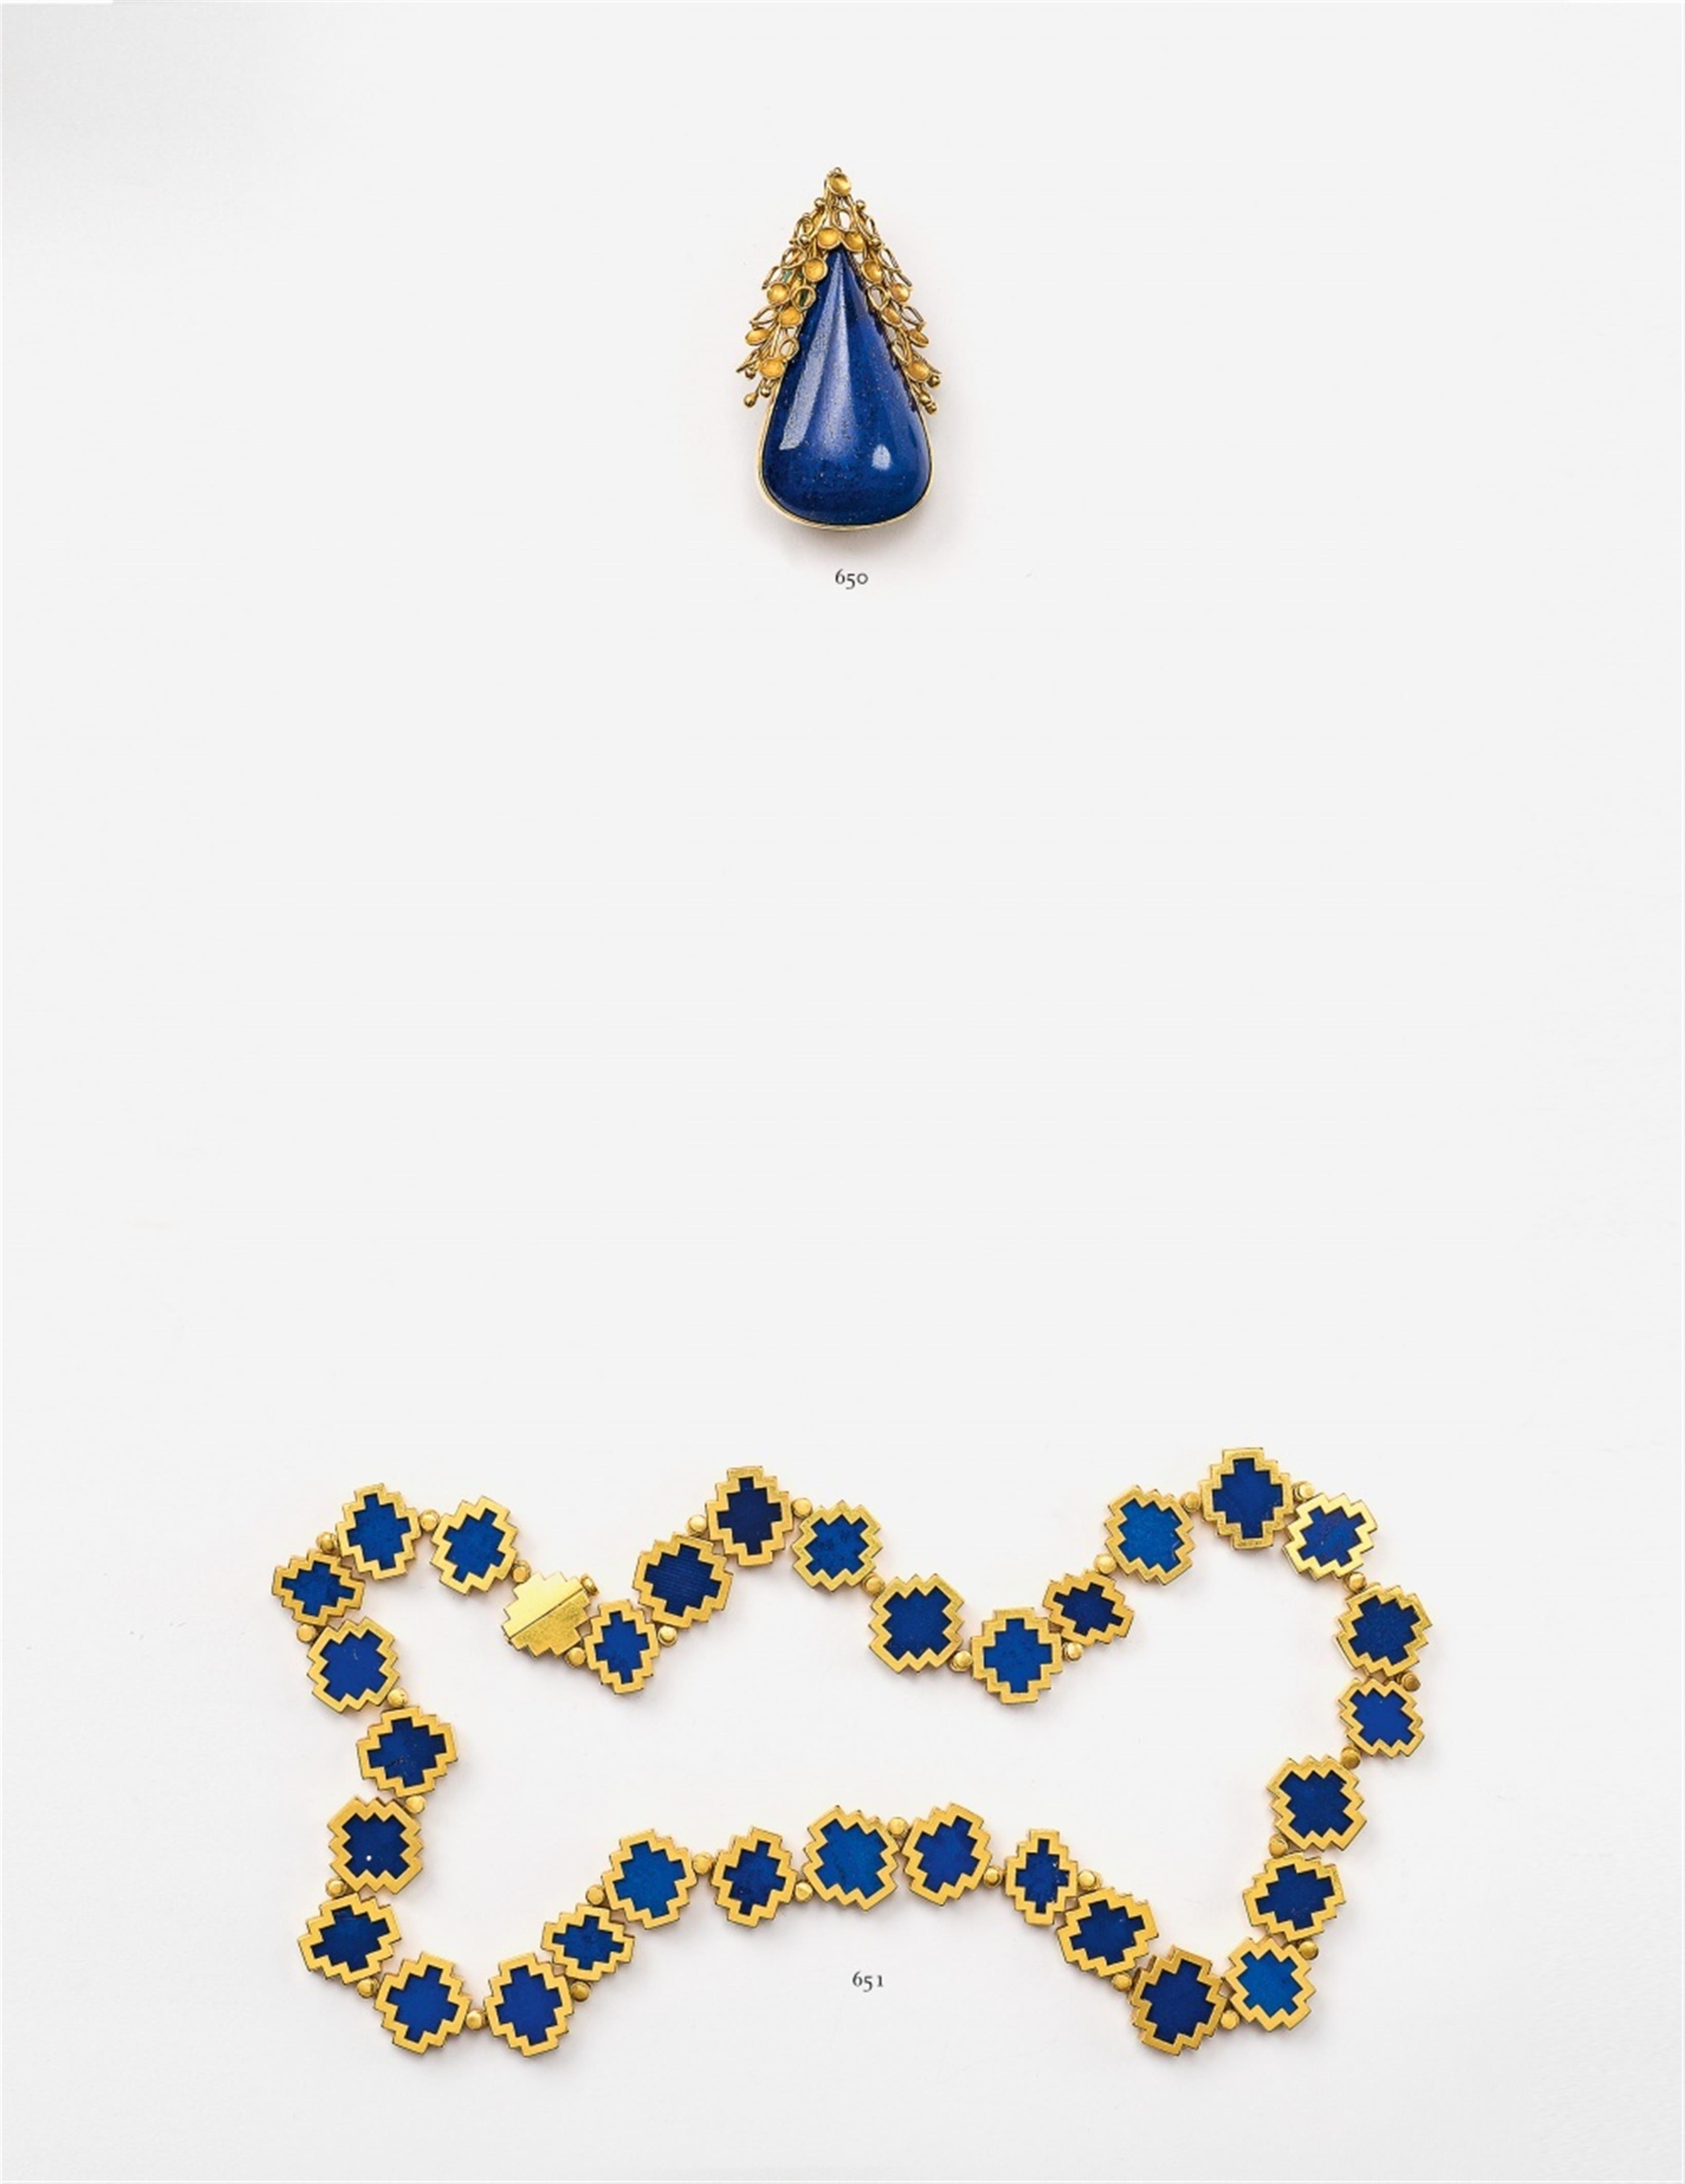 A 21k gold and lapis lazuli collier - image-2